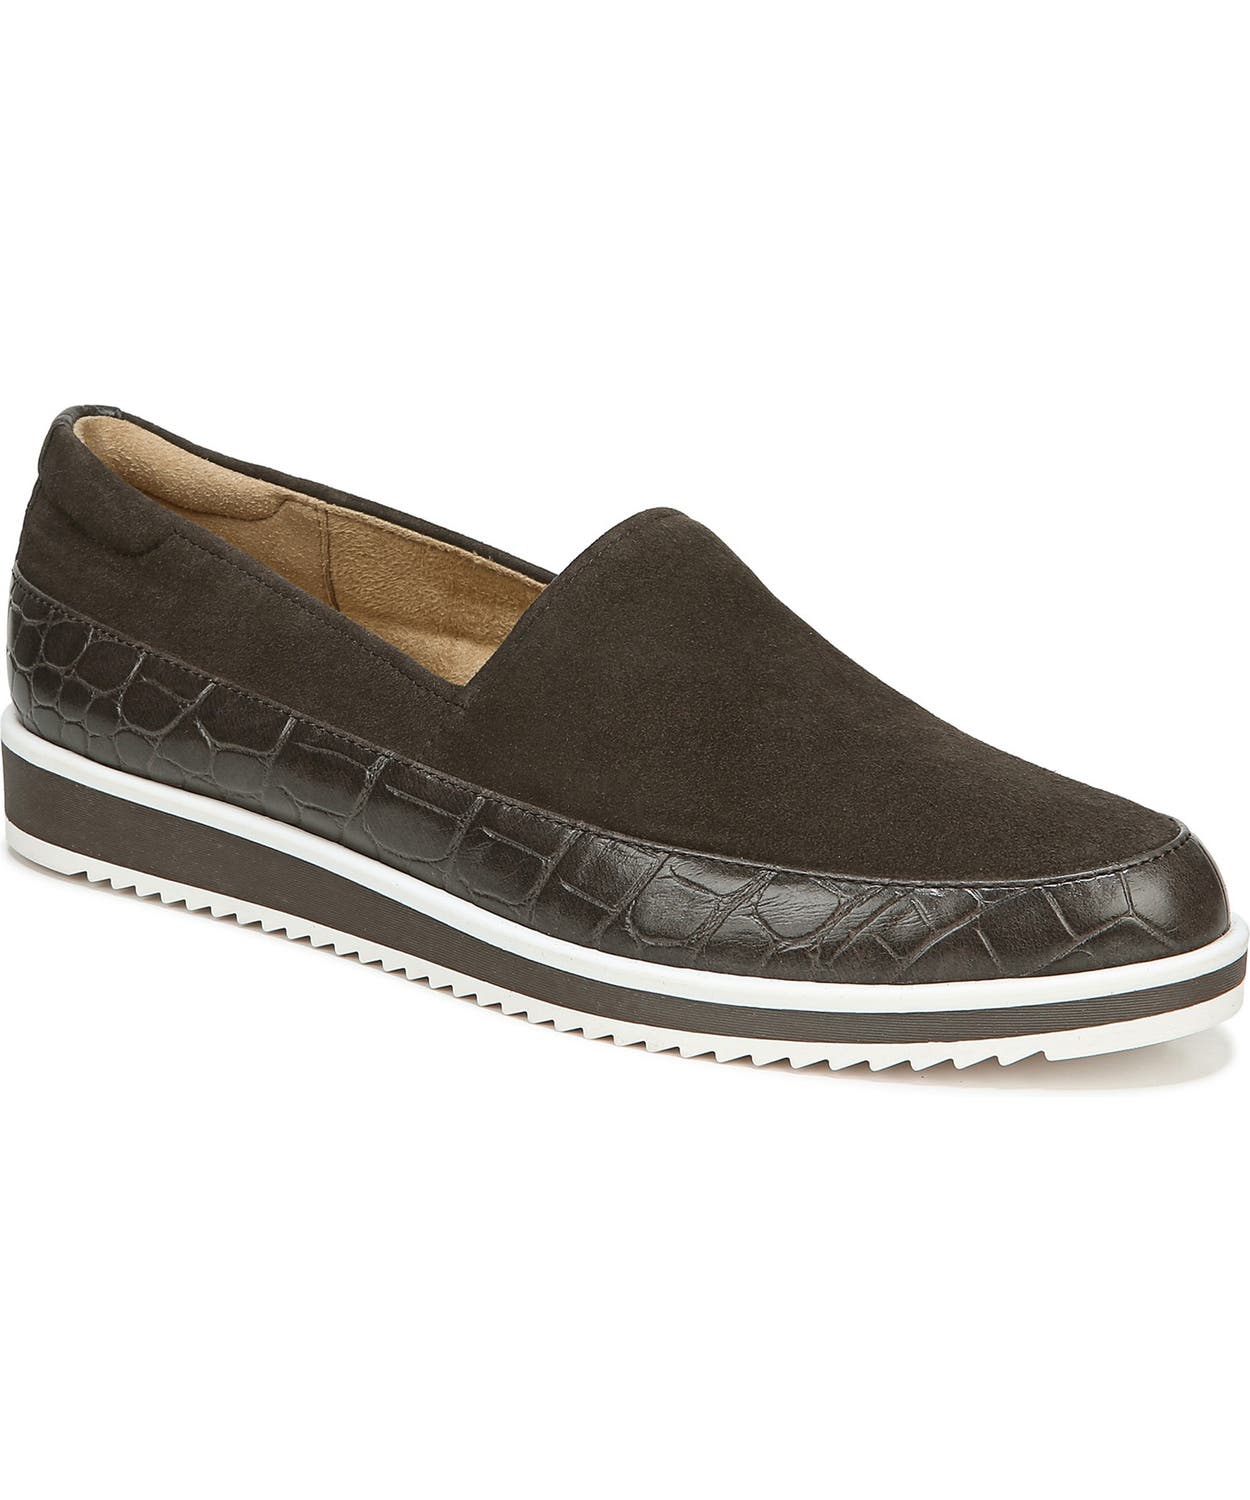 www.couturepoint.com-naturalizer-womens-taupe-suede-beale-slip-on-shoes